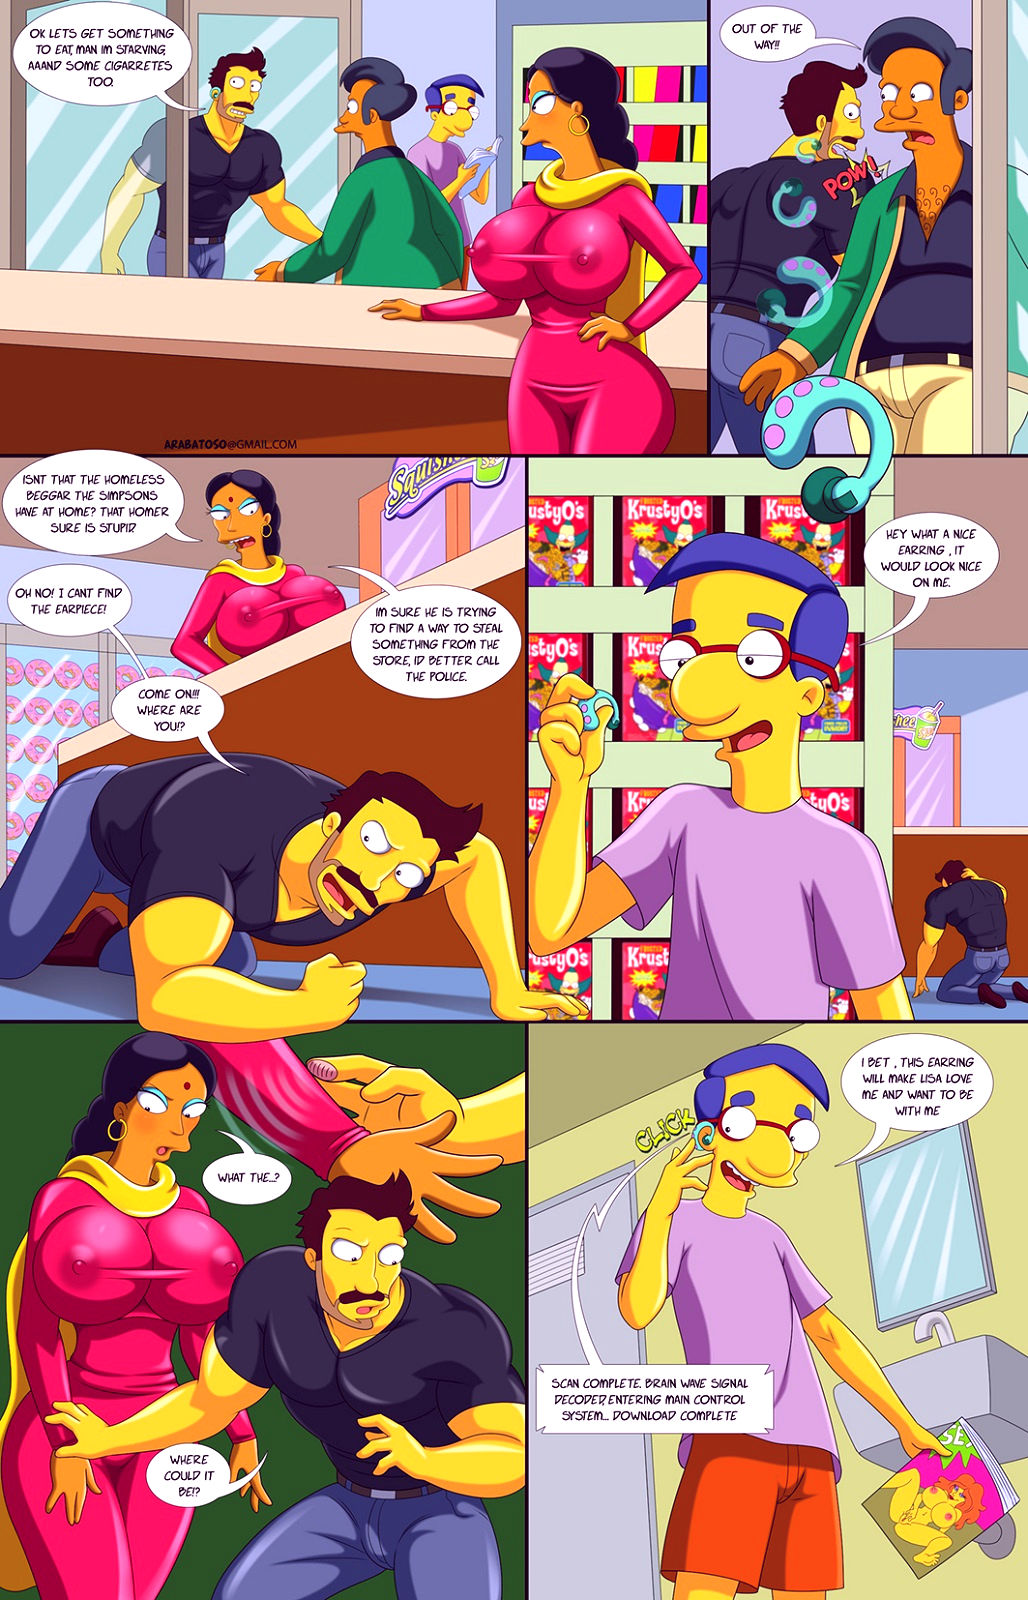 Darrens adventure or welcome to springfield porn comic picture 14